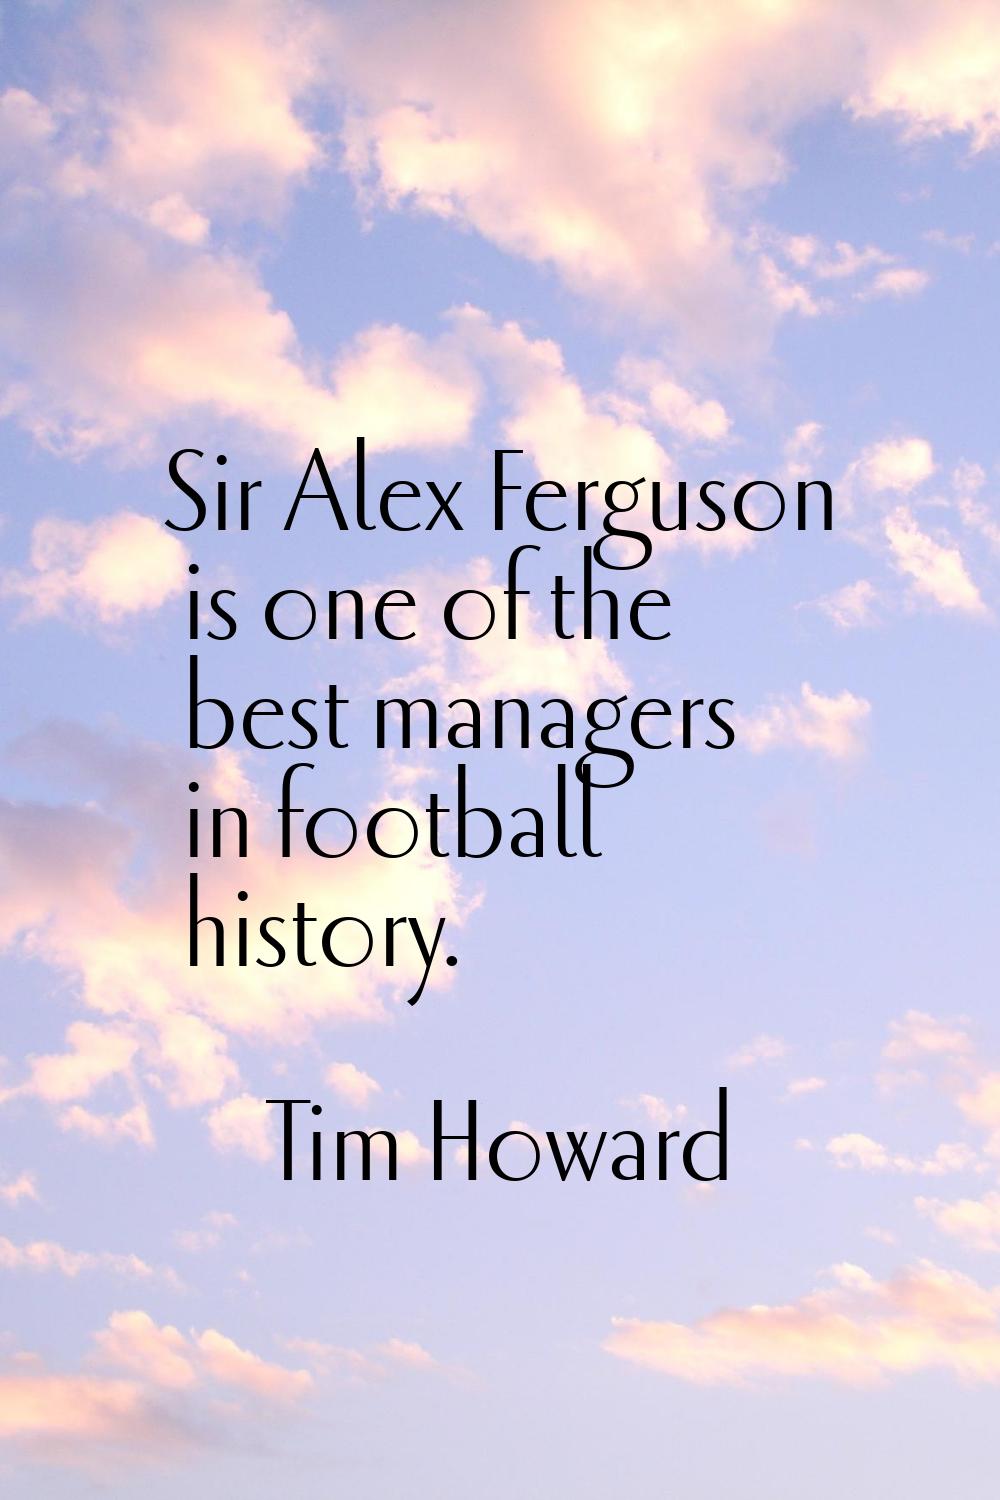 Sir Alex Ferguson is one of the best managers in football history.